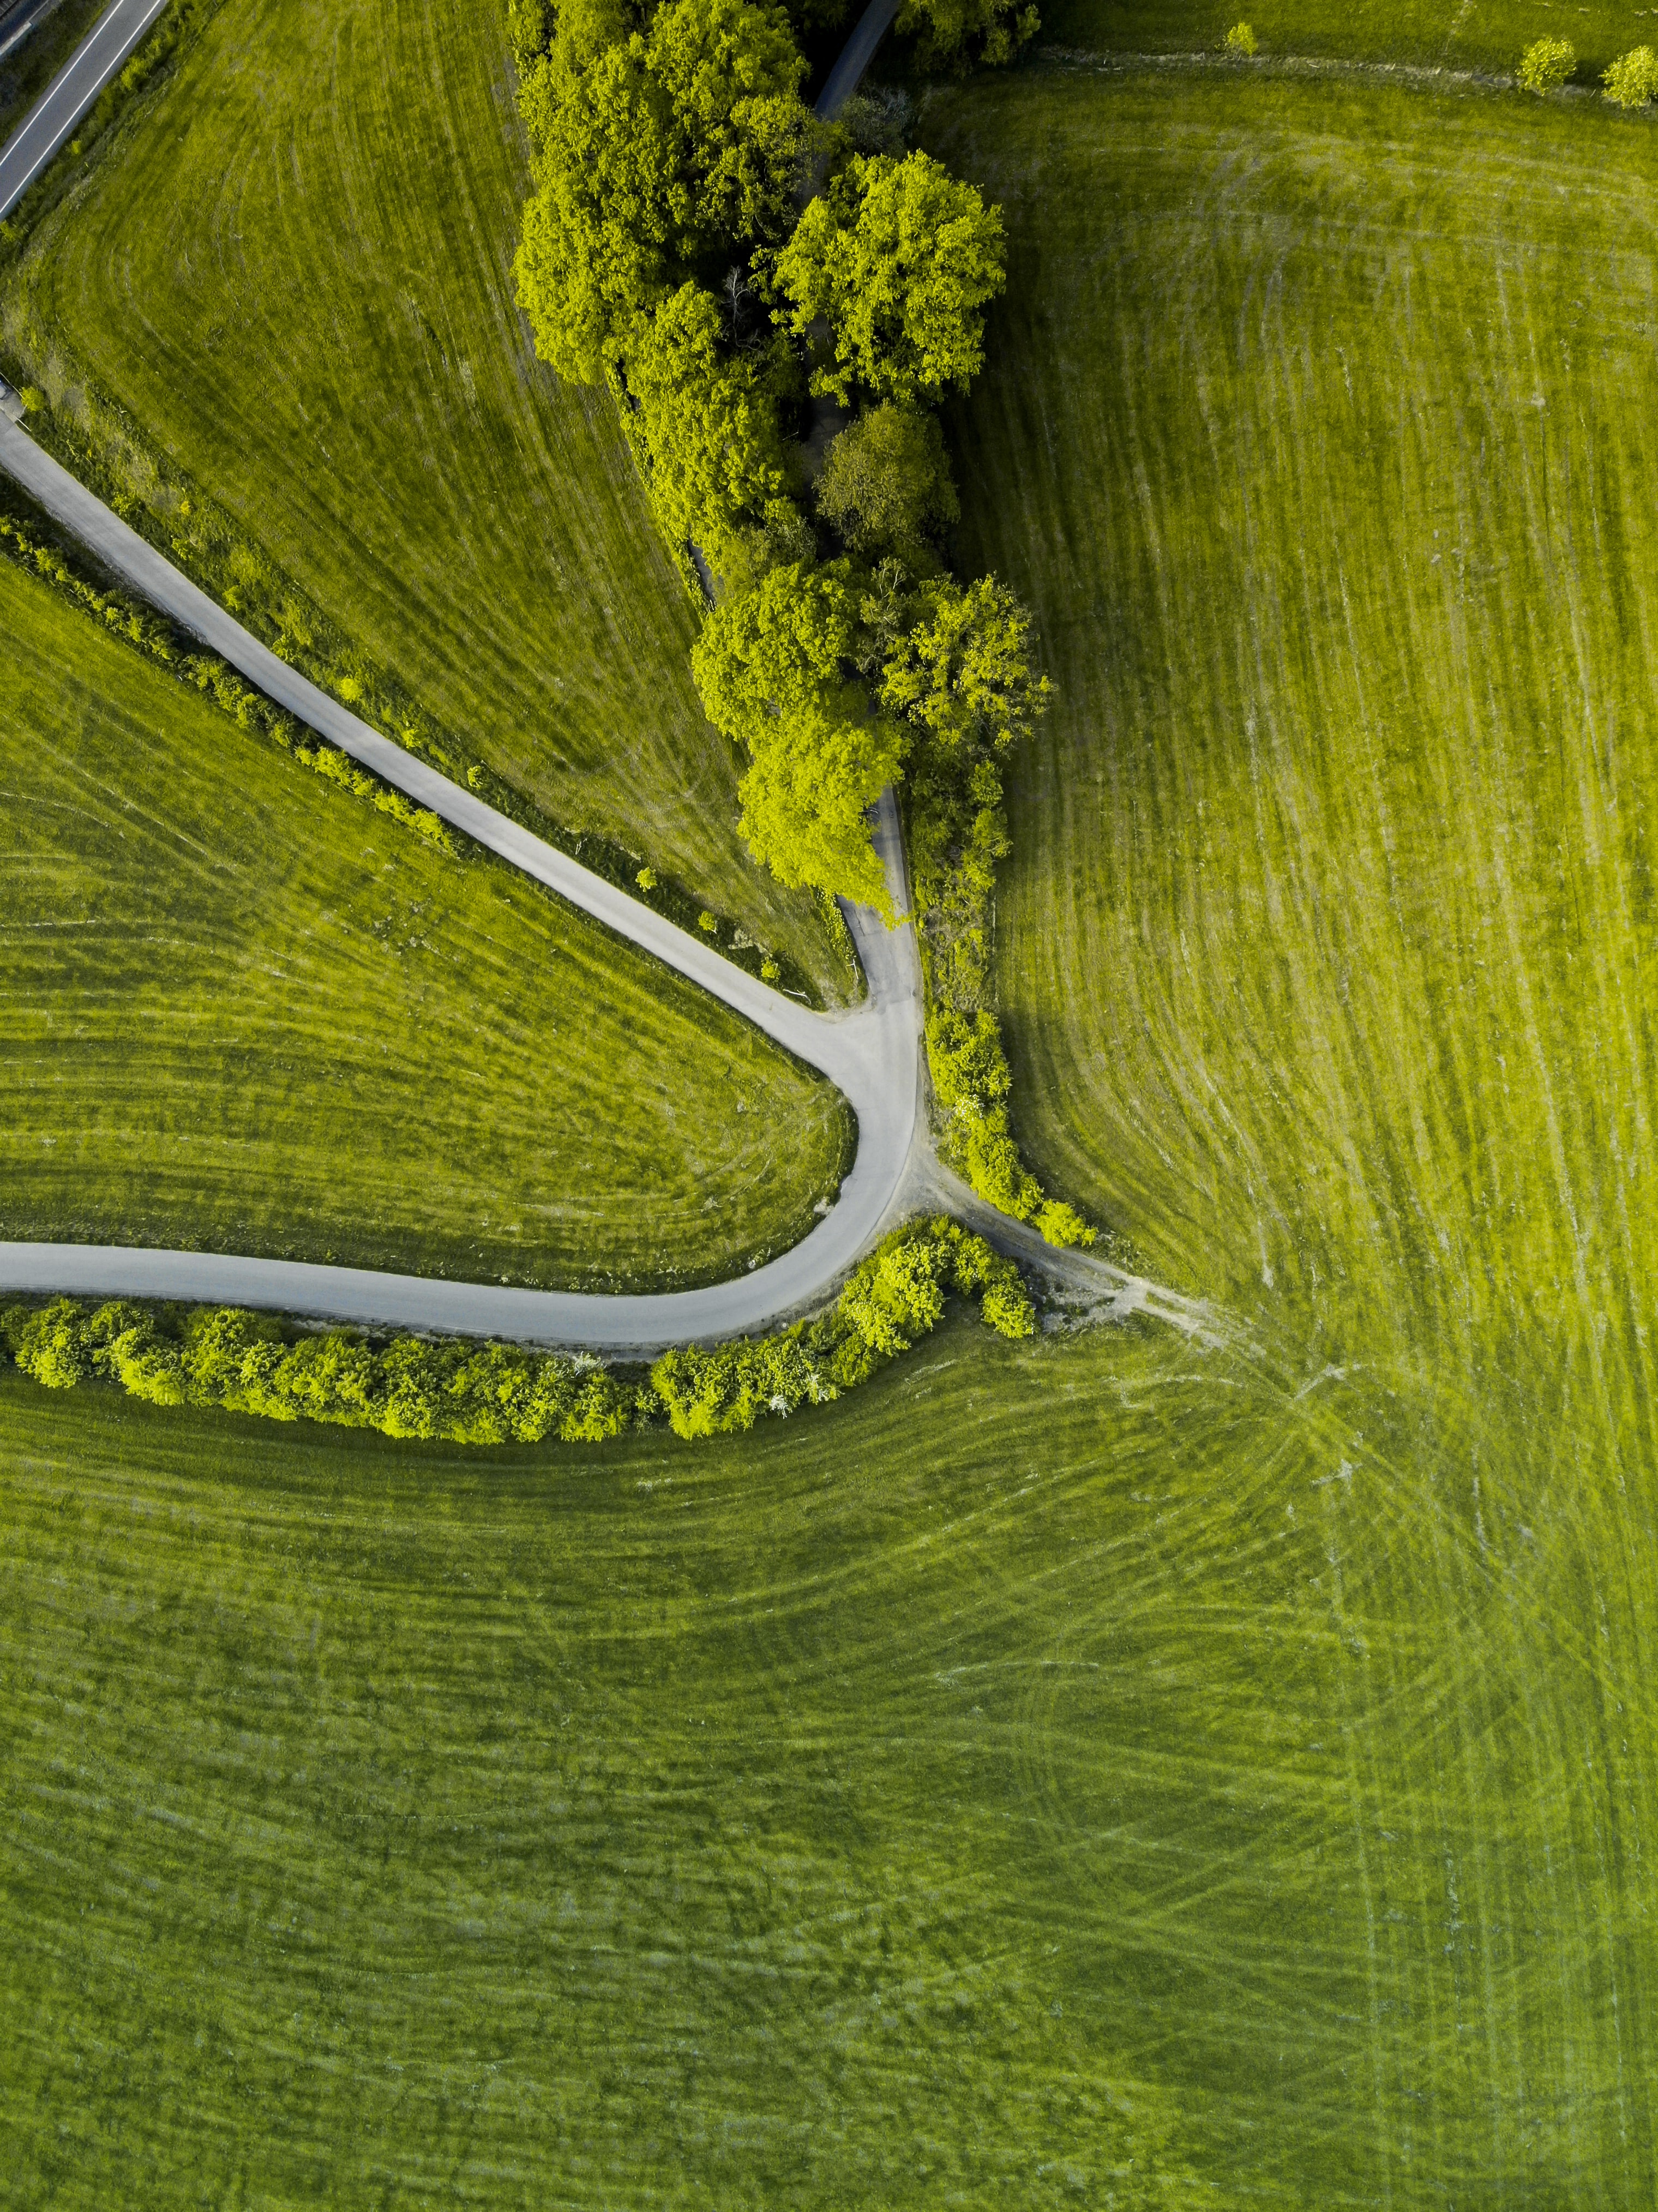 view from above, nature, trees, grass, road, winding, sinuous